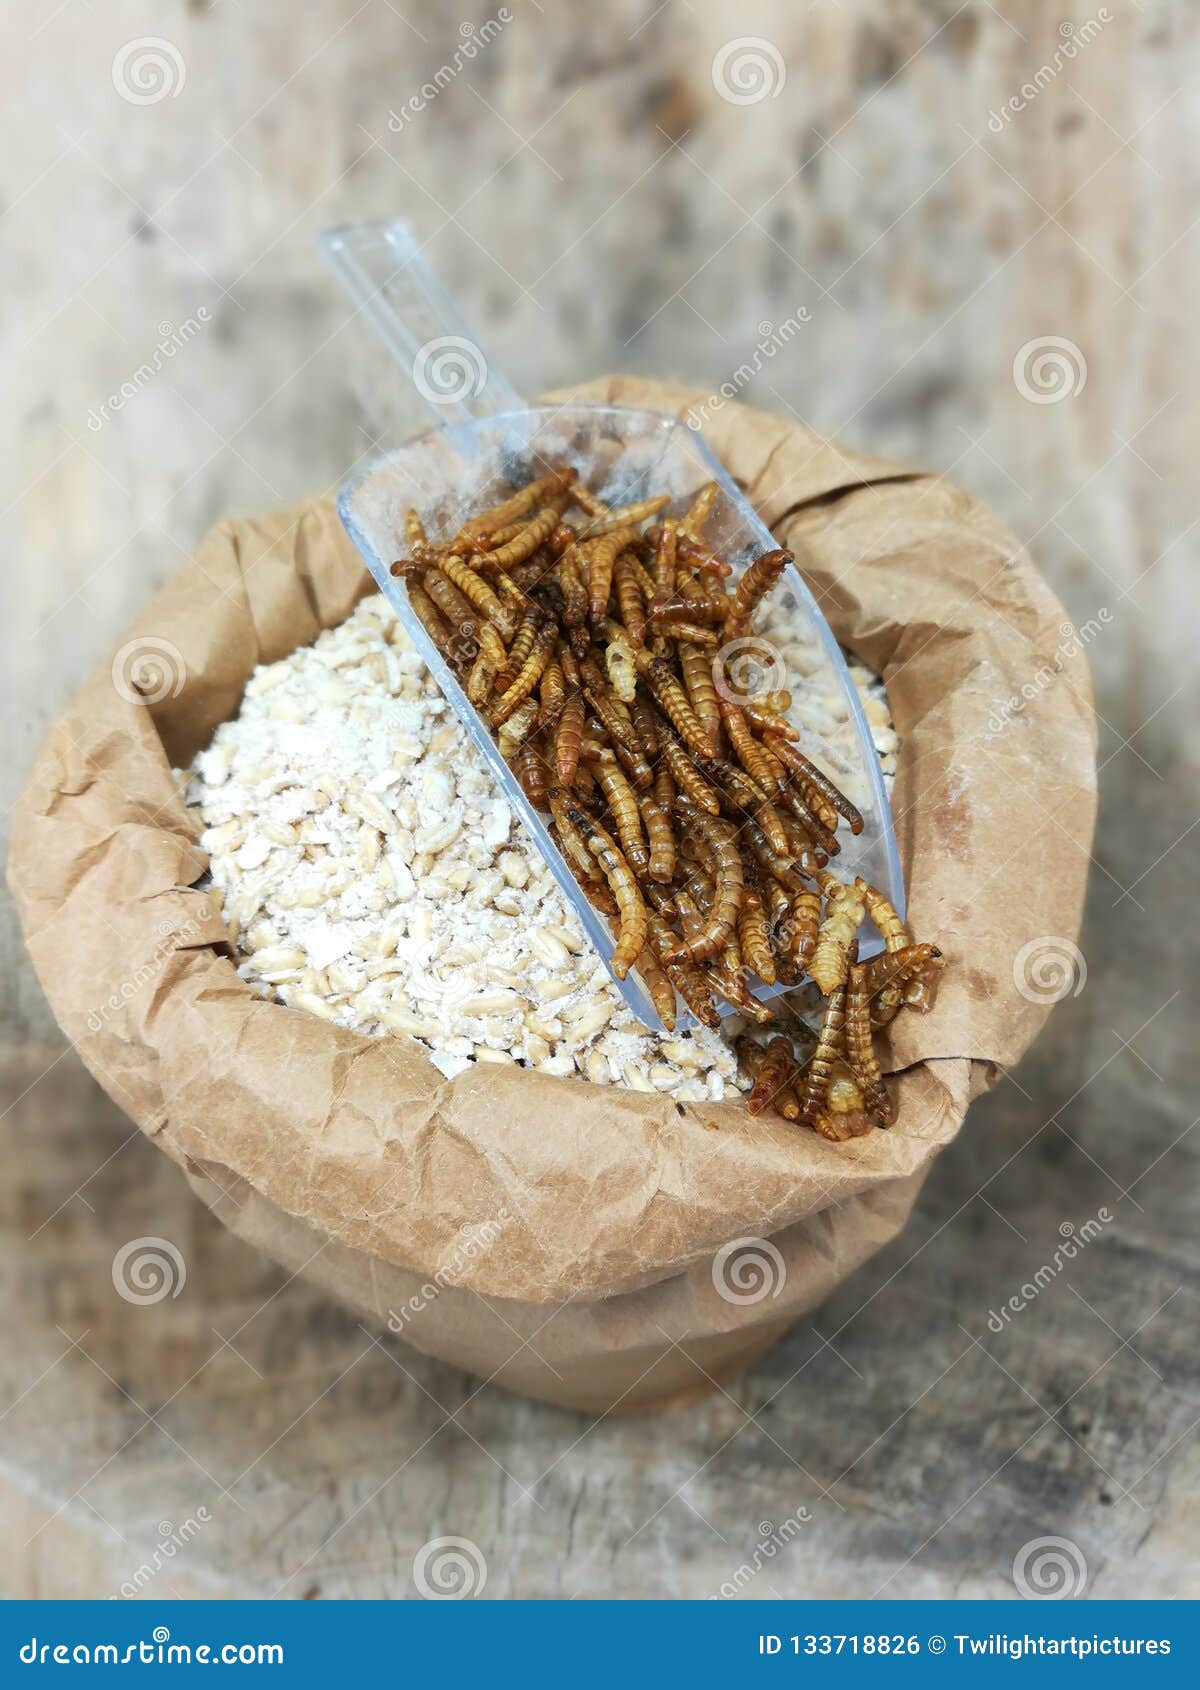 mealworms, pur proteine in grain bag